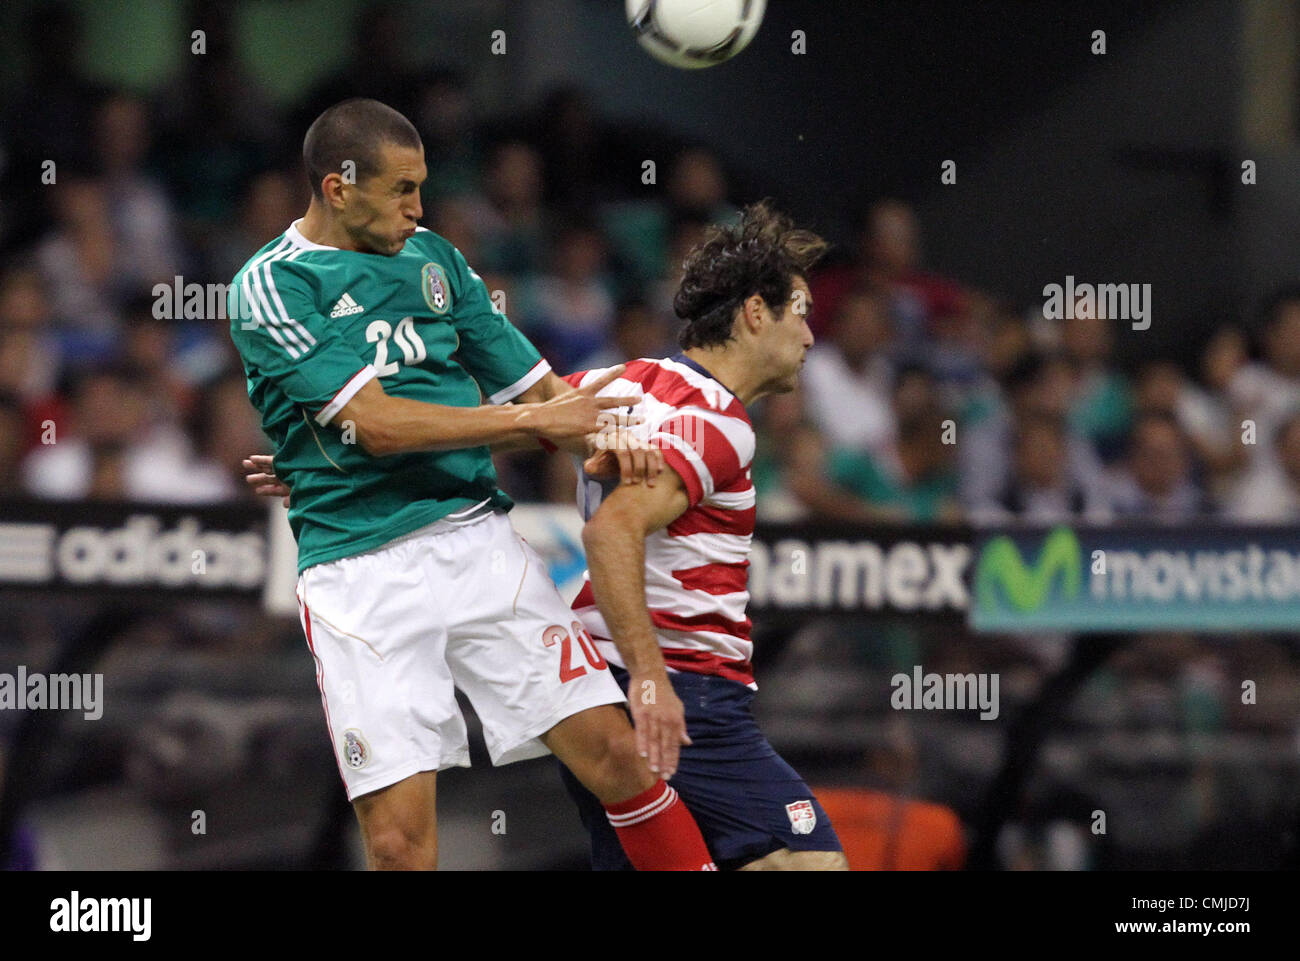 15th Aug 2012. 15.08.2012. Mexico City. Mexico.  Jorge Torres Nilo (MEX) (20) heads the ball over Graham Zusi (USA) (8). The United States Men's National Team defeated the Mexico Men's National Team 1-0 at Estadio Azteca in Mexico City, Mexico in an international friendly soccer match. © Action Plus Sports Images / Alamy Live News Stock Photo